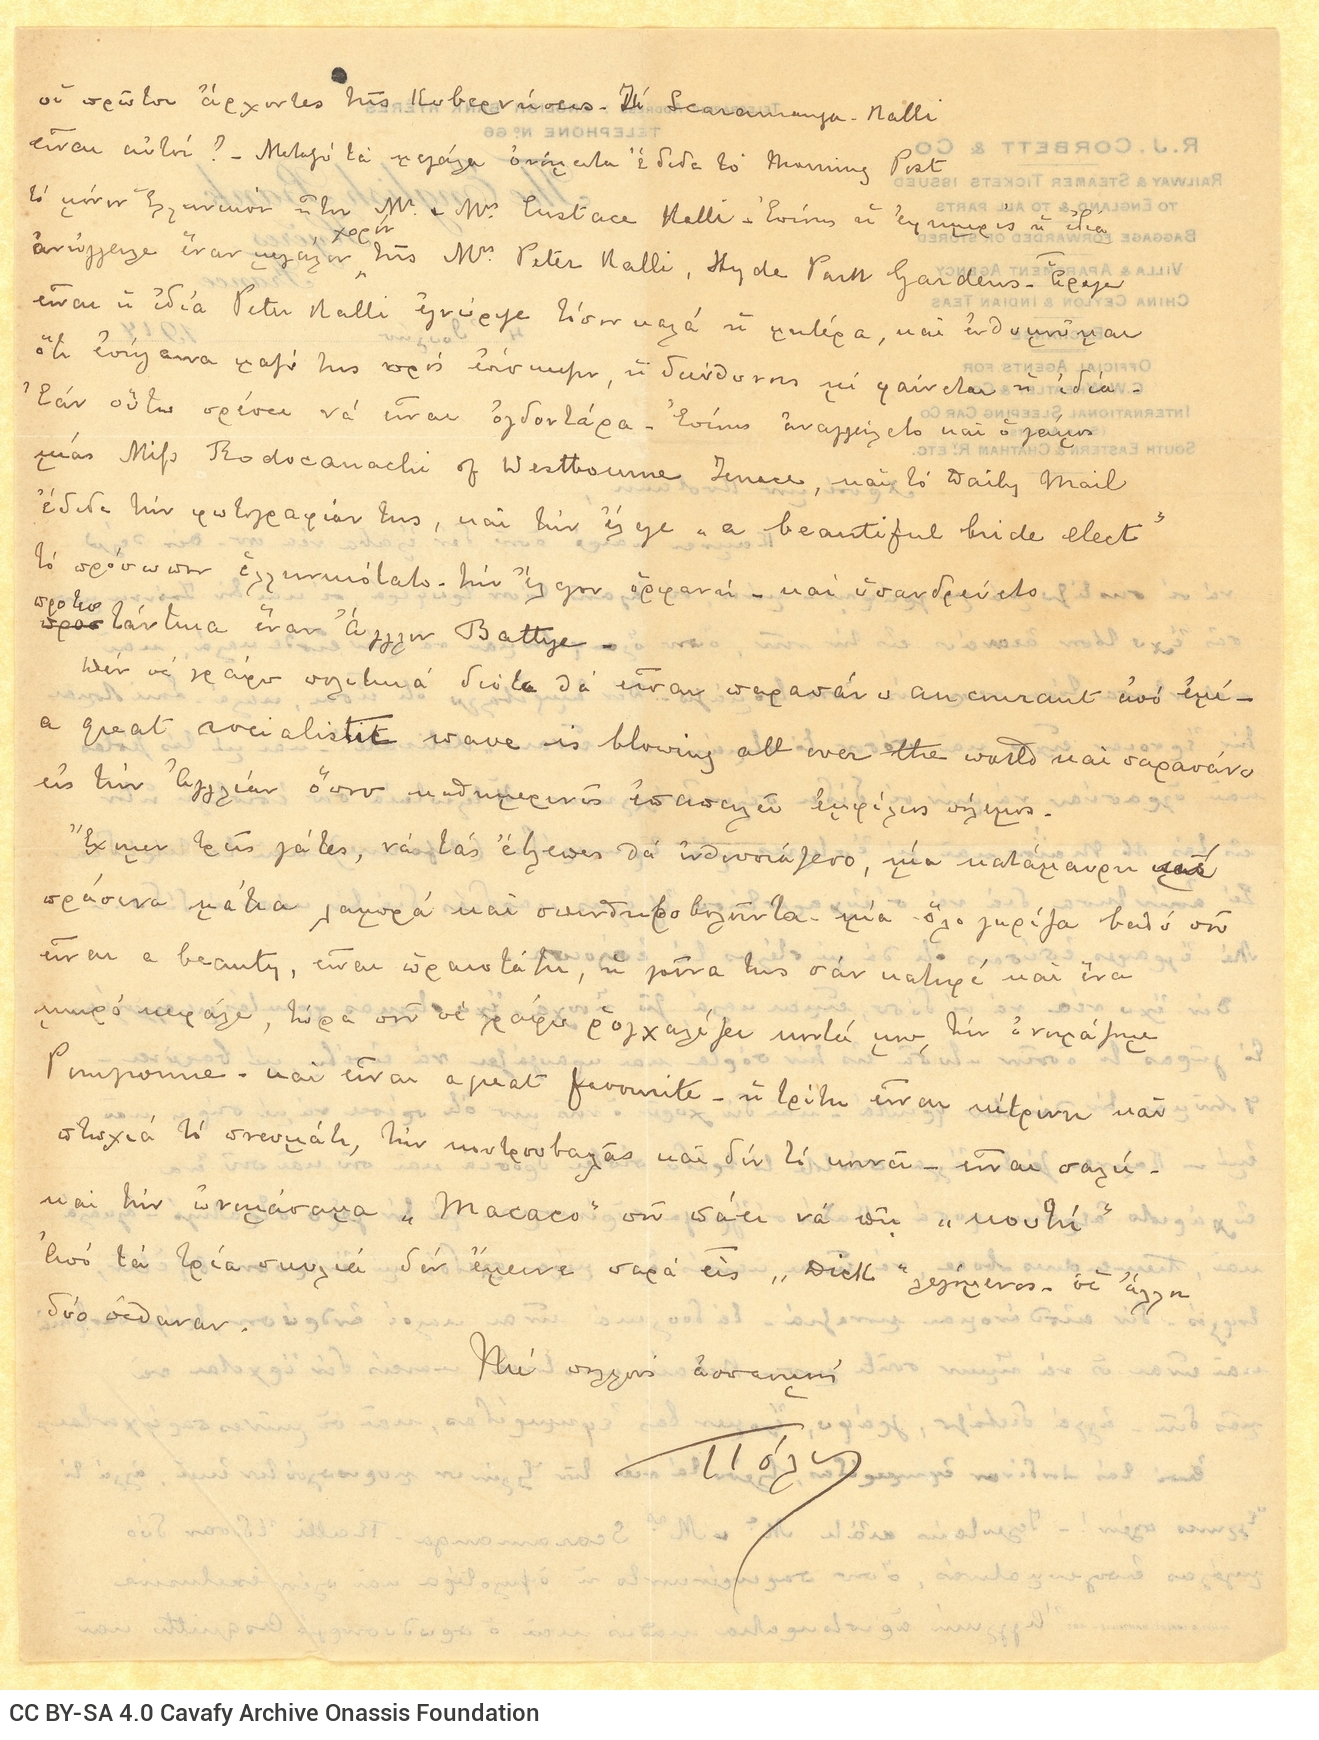 Handwritten letter by Paul Cavafy to C. P. Cavafy from Hyères, France, on both sides of a letterhead. Paul expresses concern